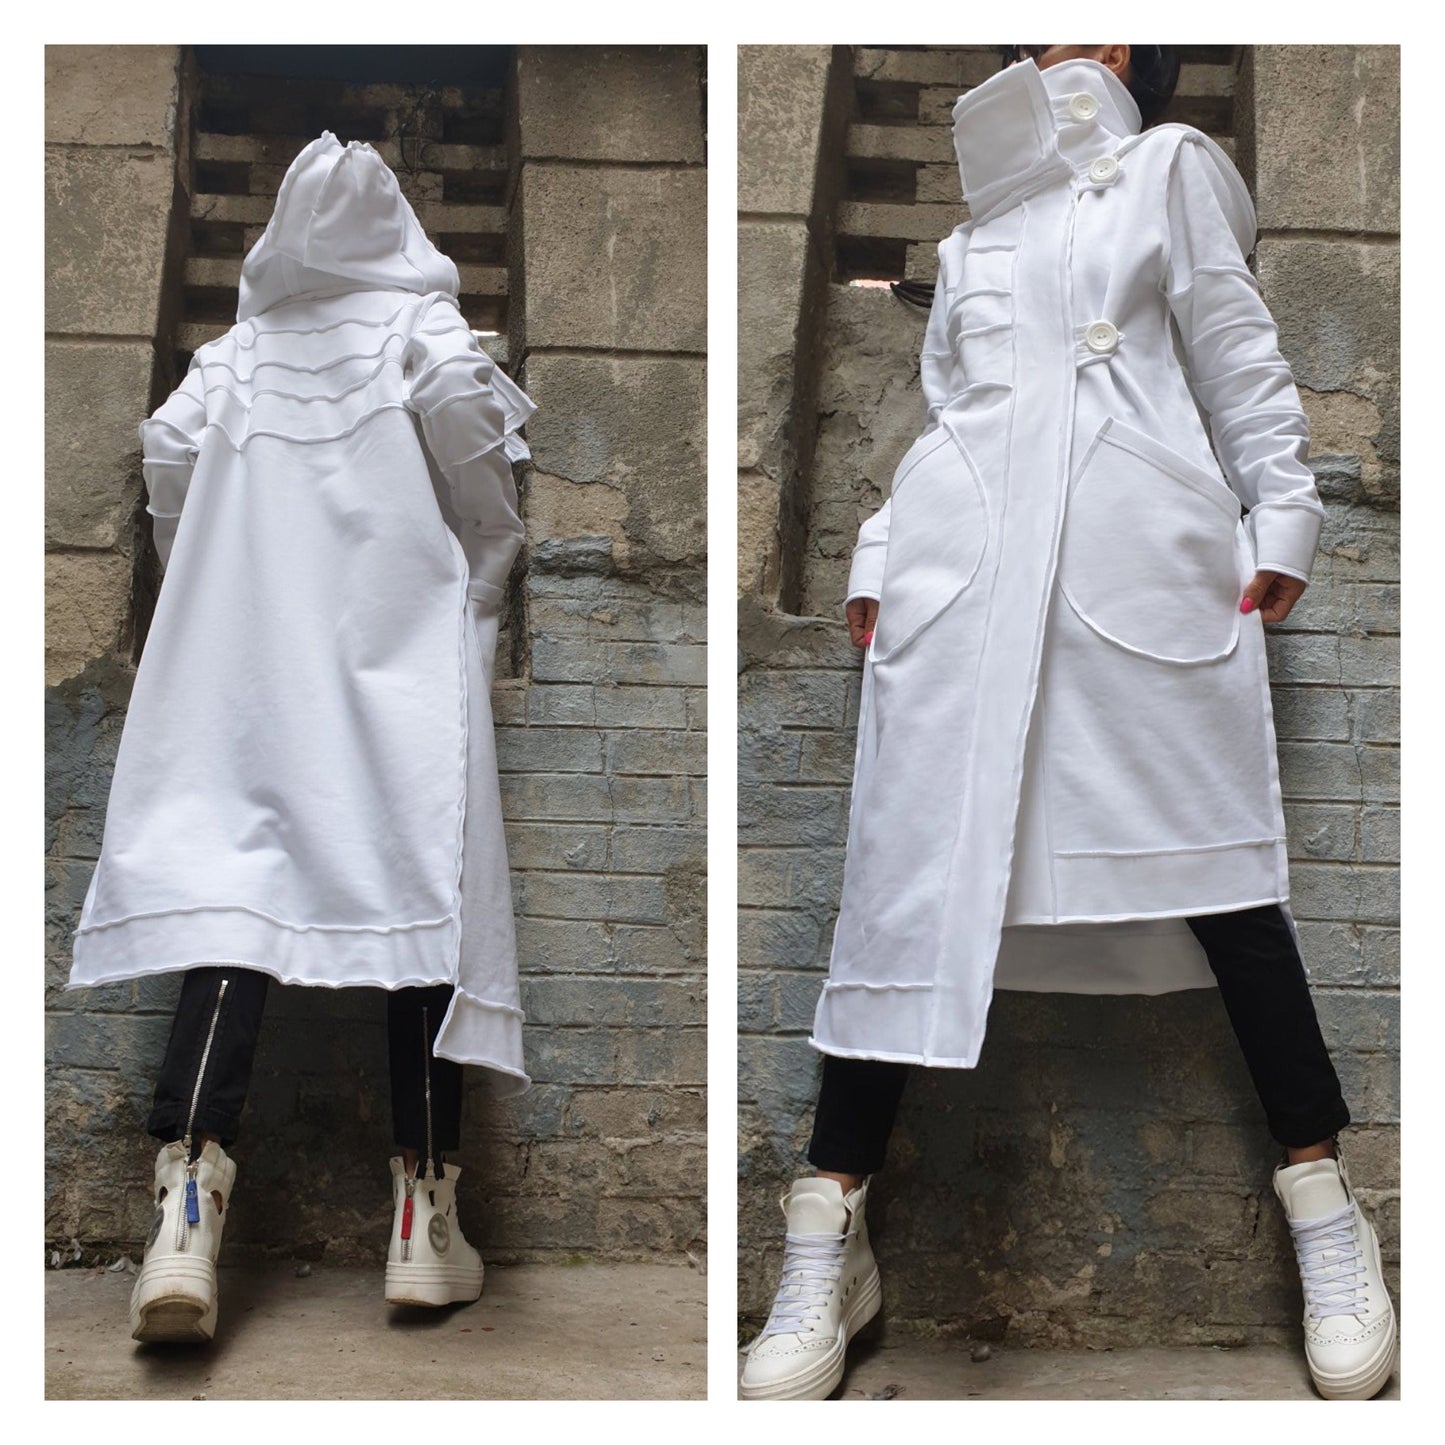 New Collection Everyday Coat - Handmade clothing from AngelBySilvia - Top Designer Brands 